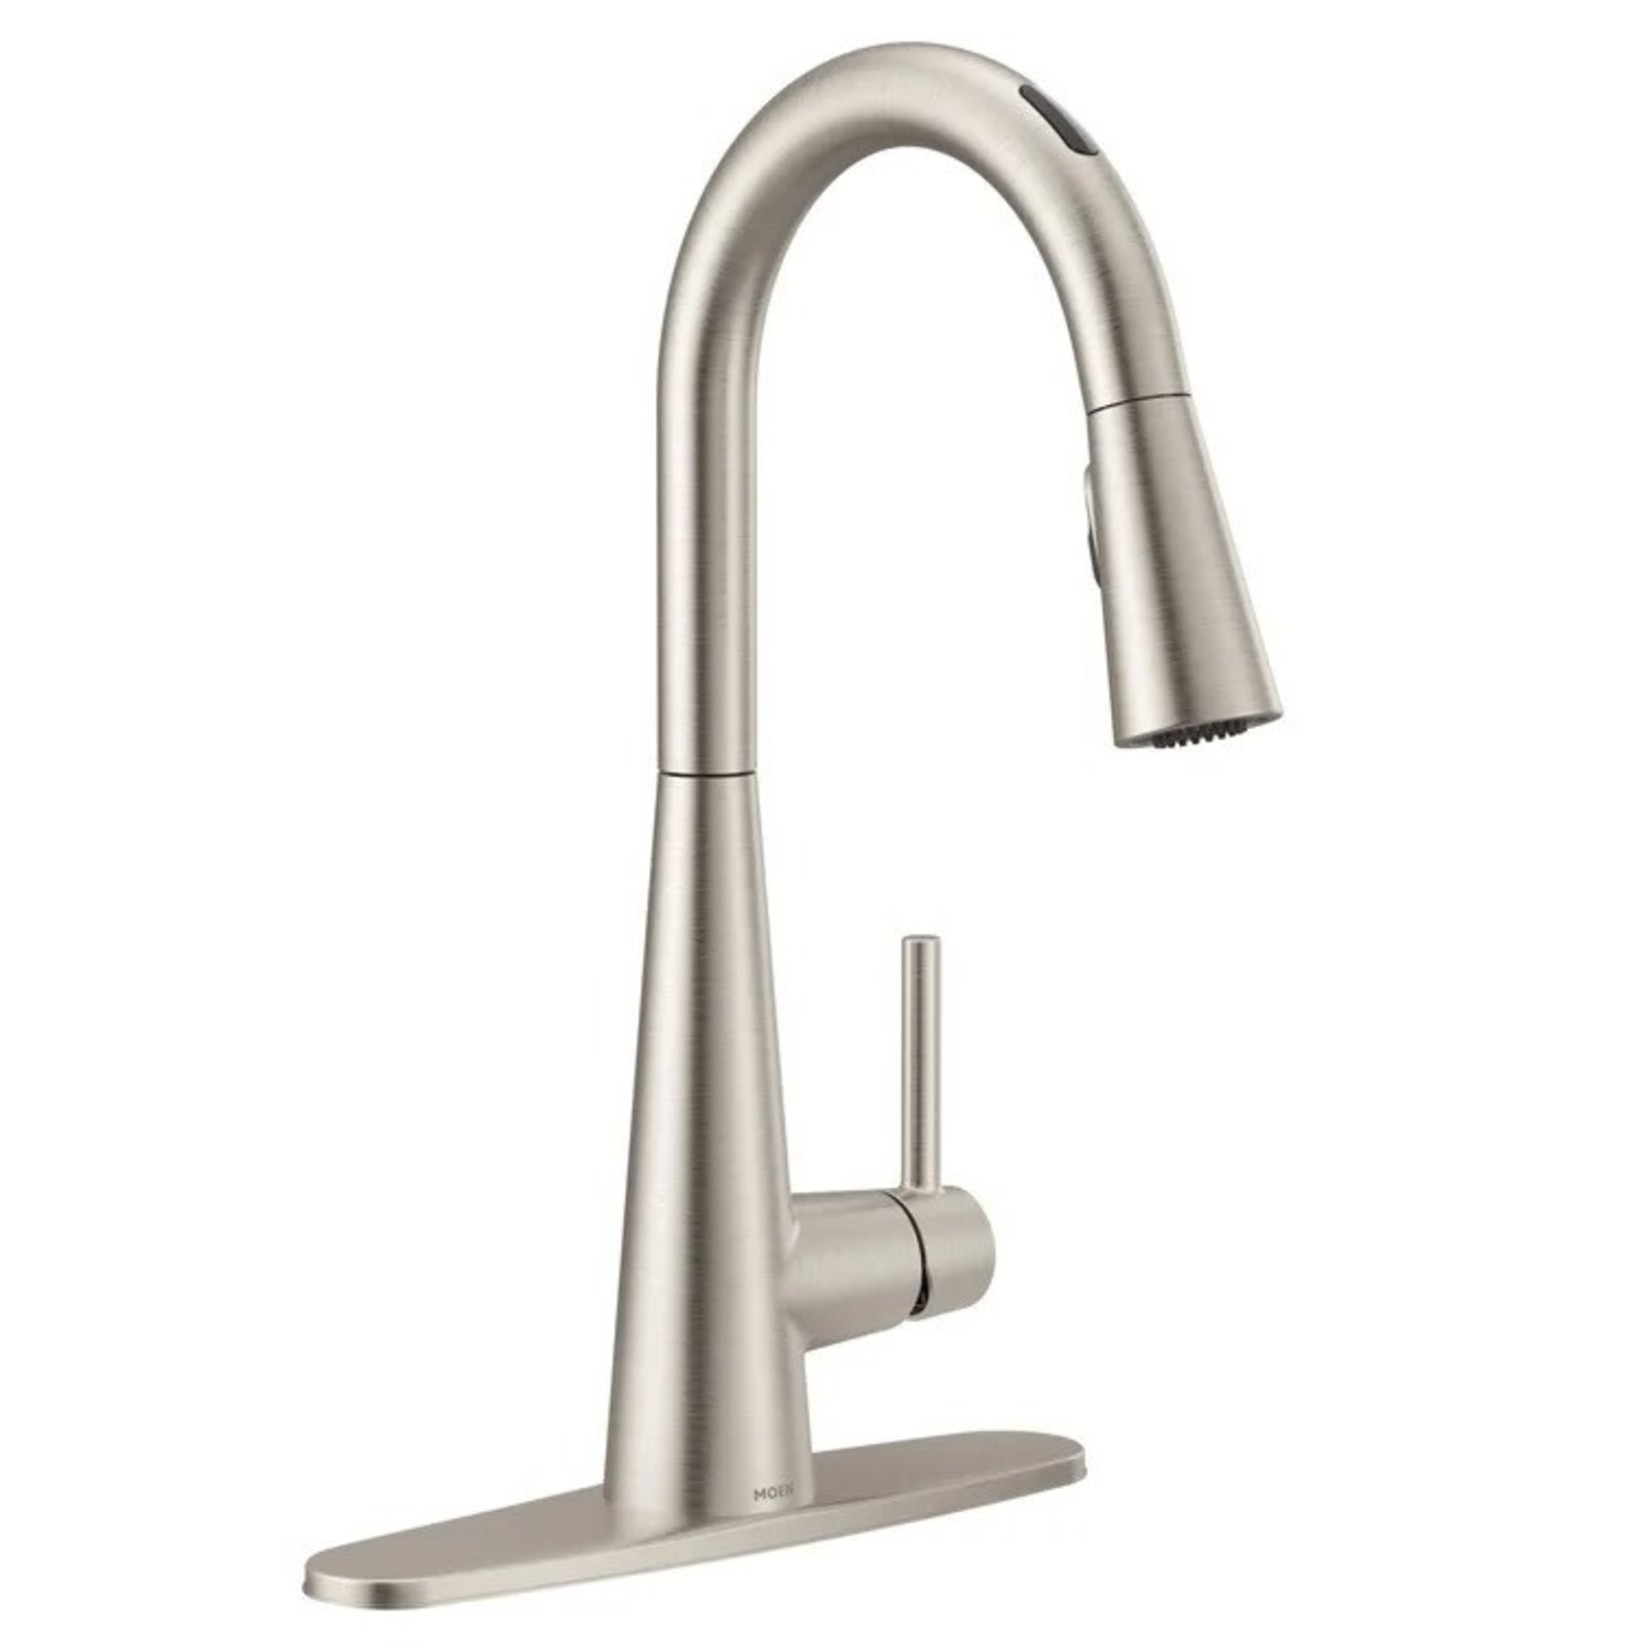 *Moen Sleek Smart Touchless Single Handle Kitchen Faucet with Power Clean and Duralock